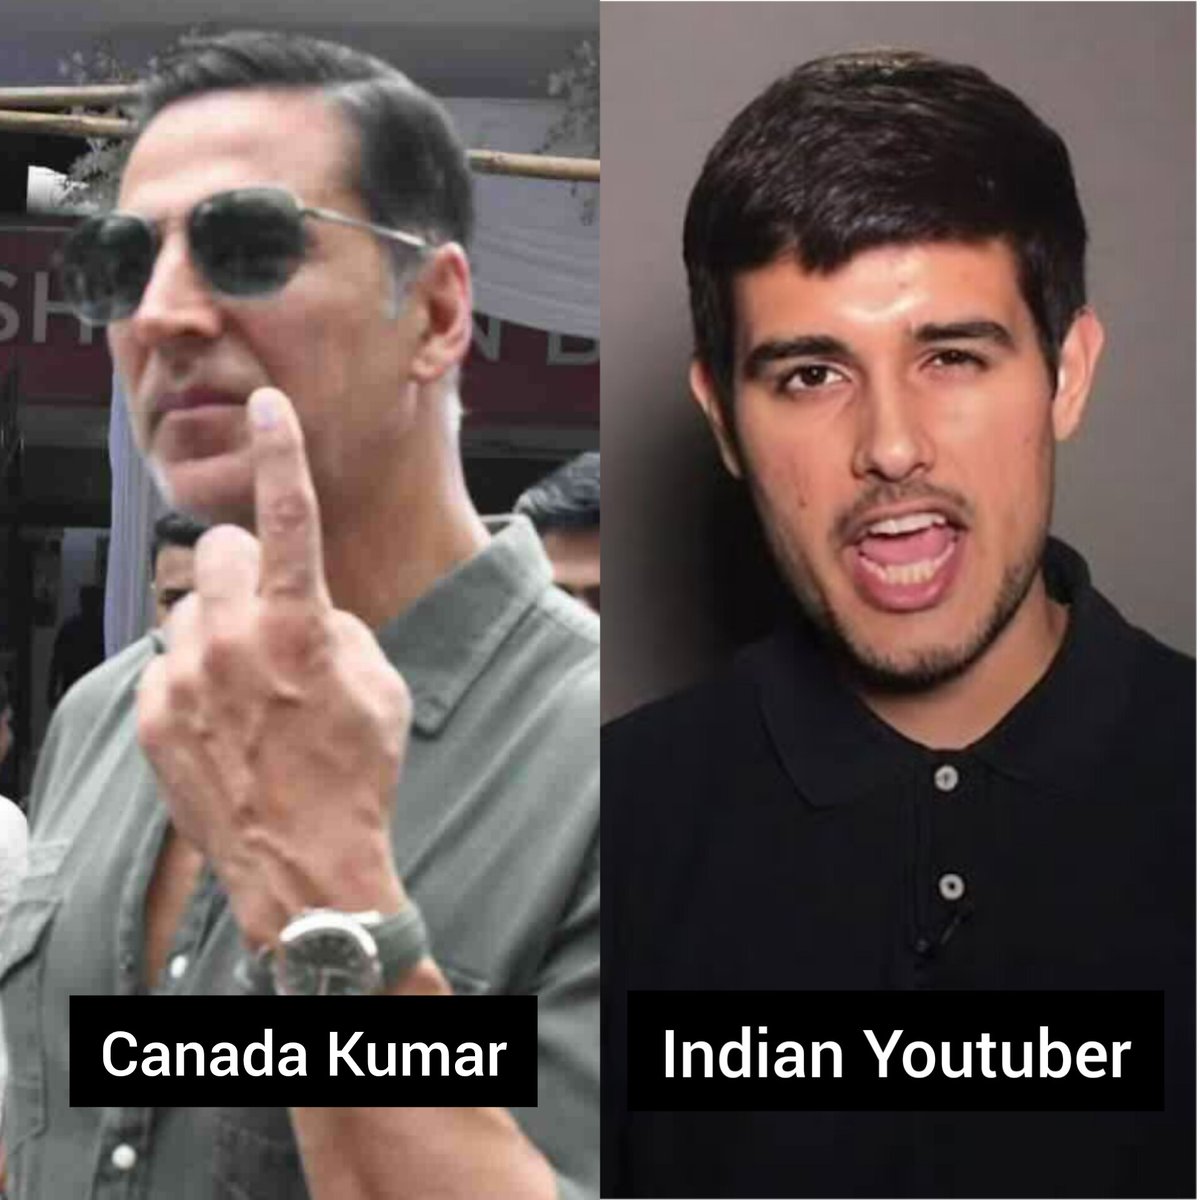 #AkshayKumar lives in India, works in India, pays tax in India, has never lived in Canada, votes in India but he is Canada Kumar. #DhruvRathee has lived all his adult life in Germany, works in Germany, pays tax in Germany, doesn't vote in India but he is Indian Youtuber.